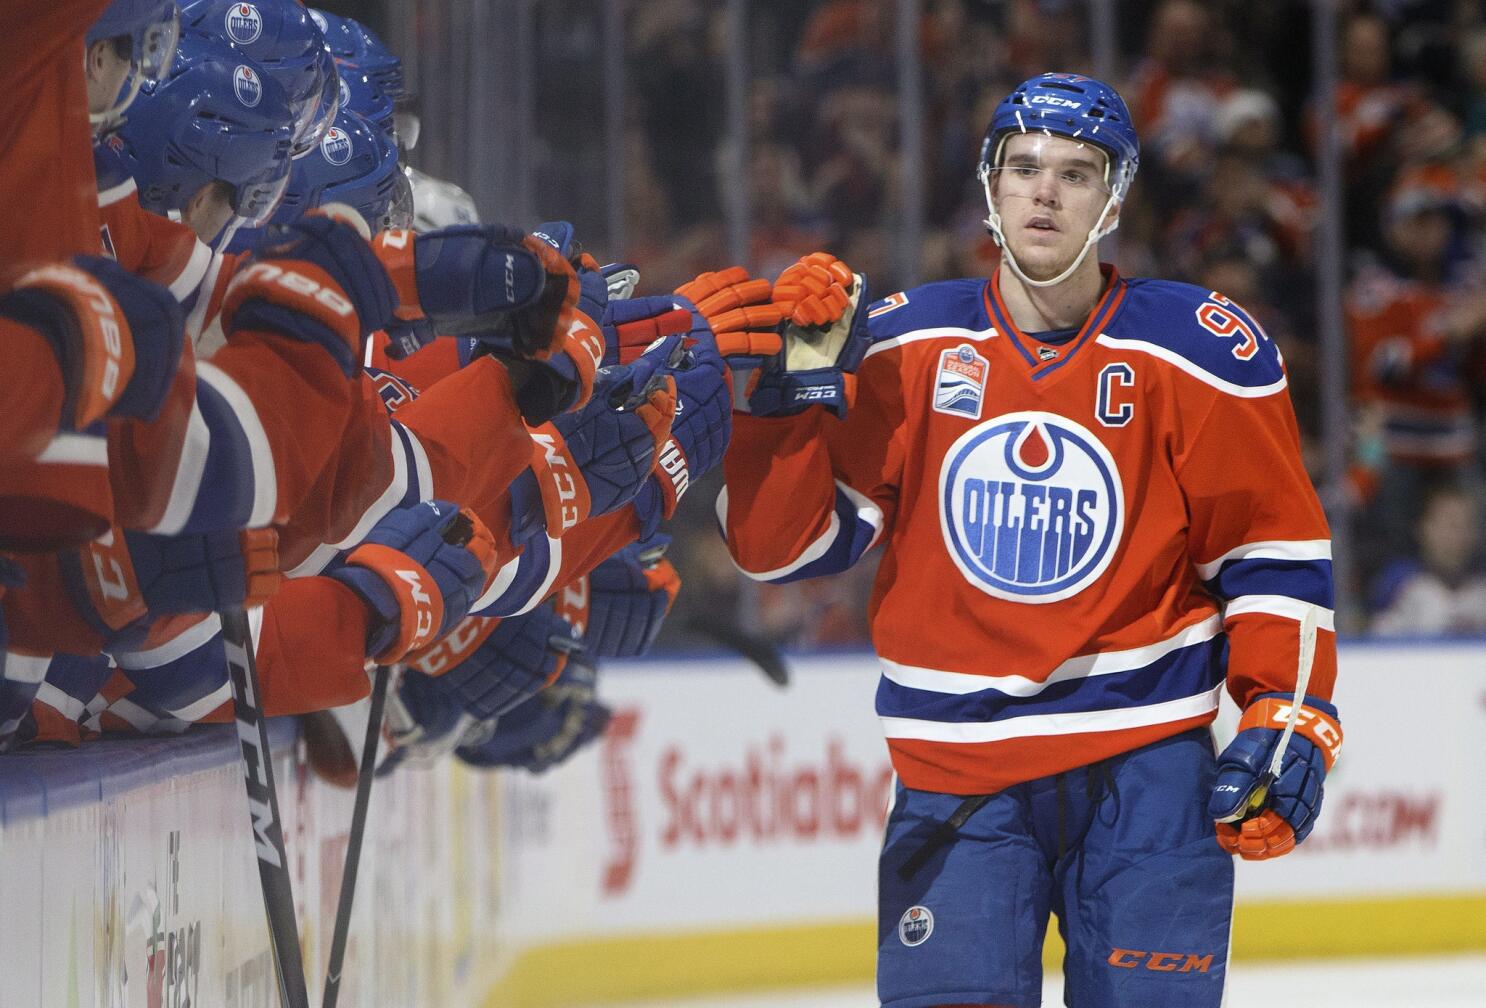 Connor McDavid showing maturity embracing role as a spokesman for hockey